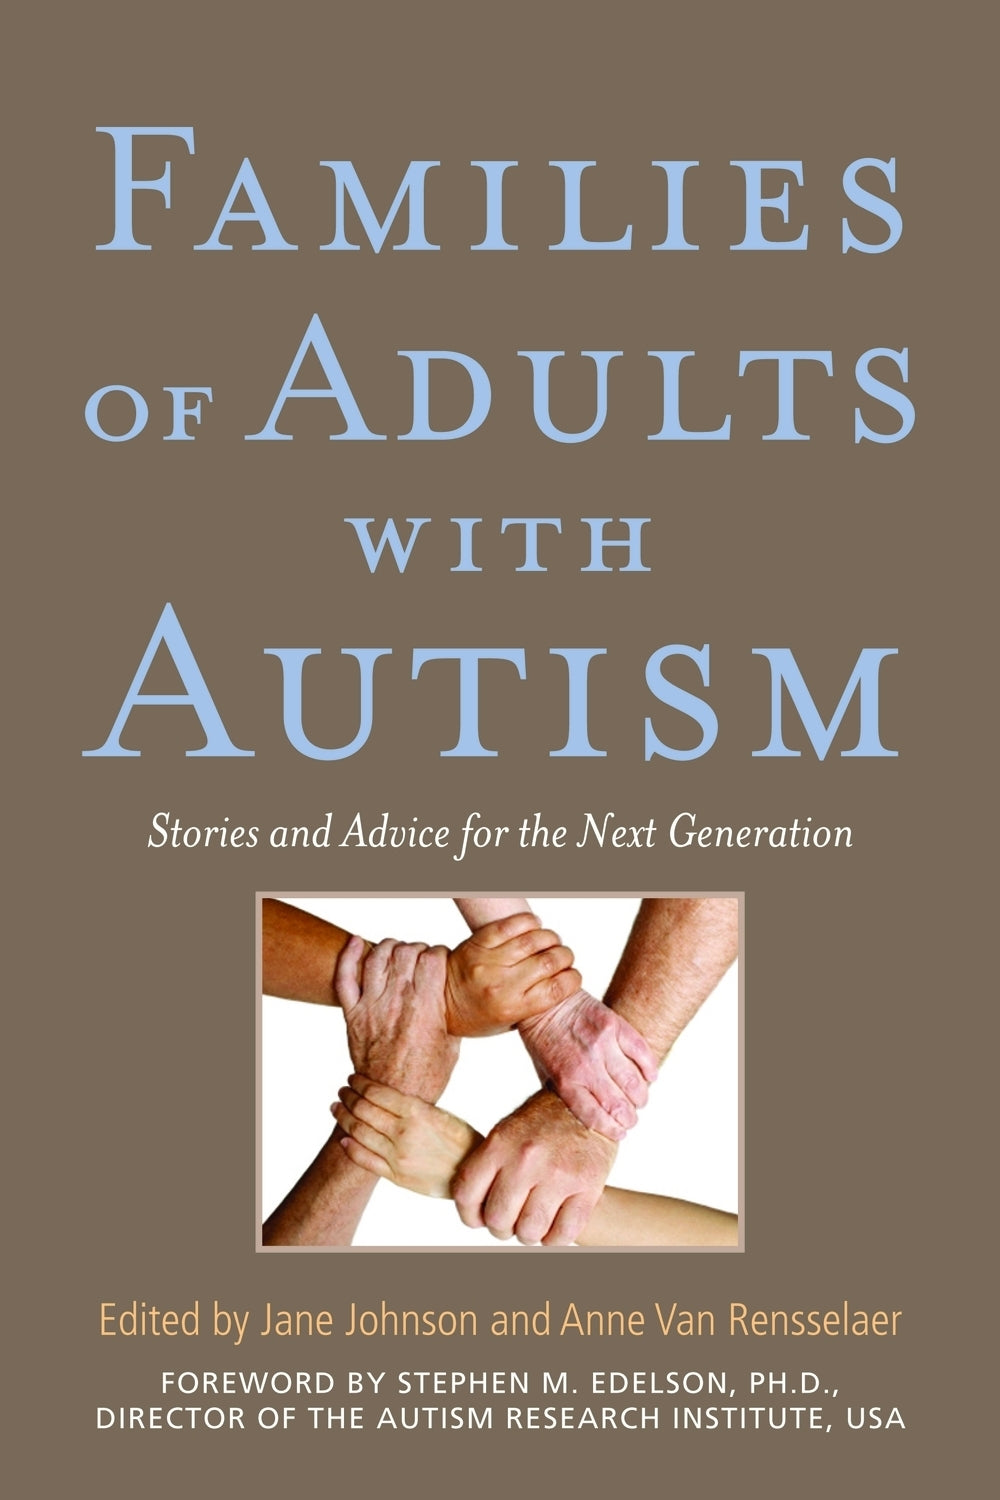 Families of Adults with Autism by Jane Botsford Johnson, Stephen M. Edelson, Anne Van Rensselaer, No Author Listed